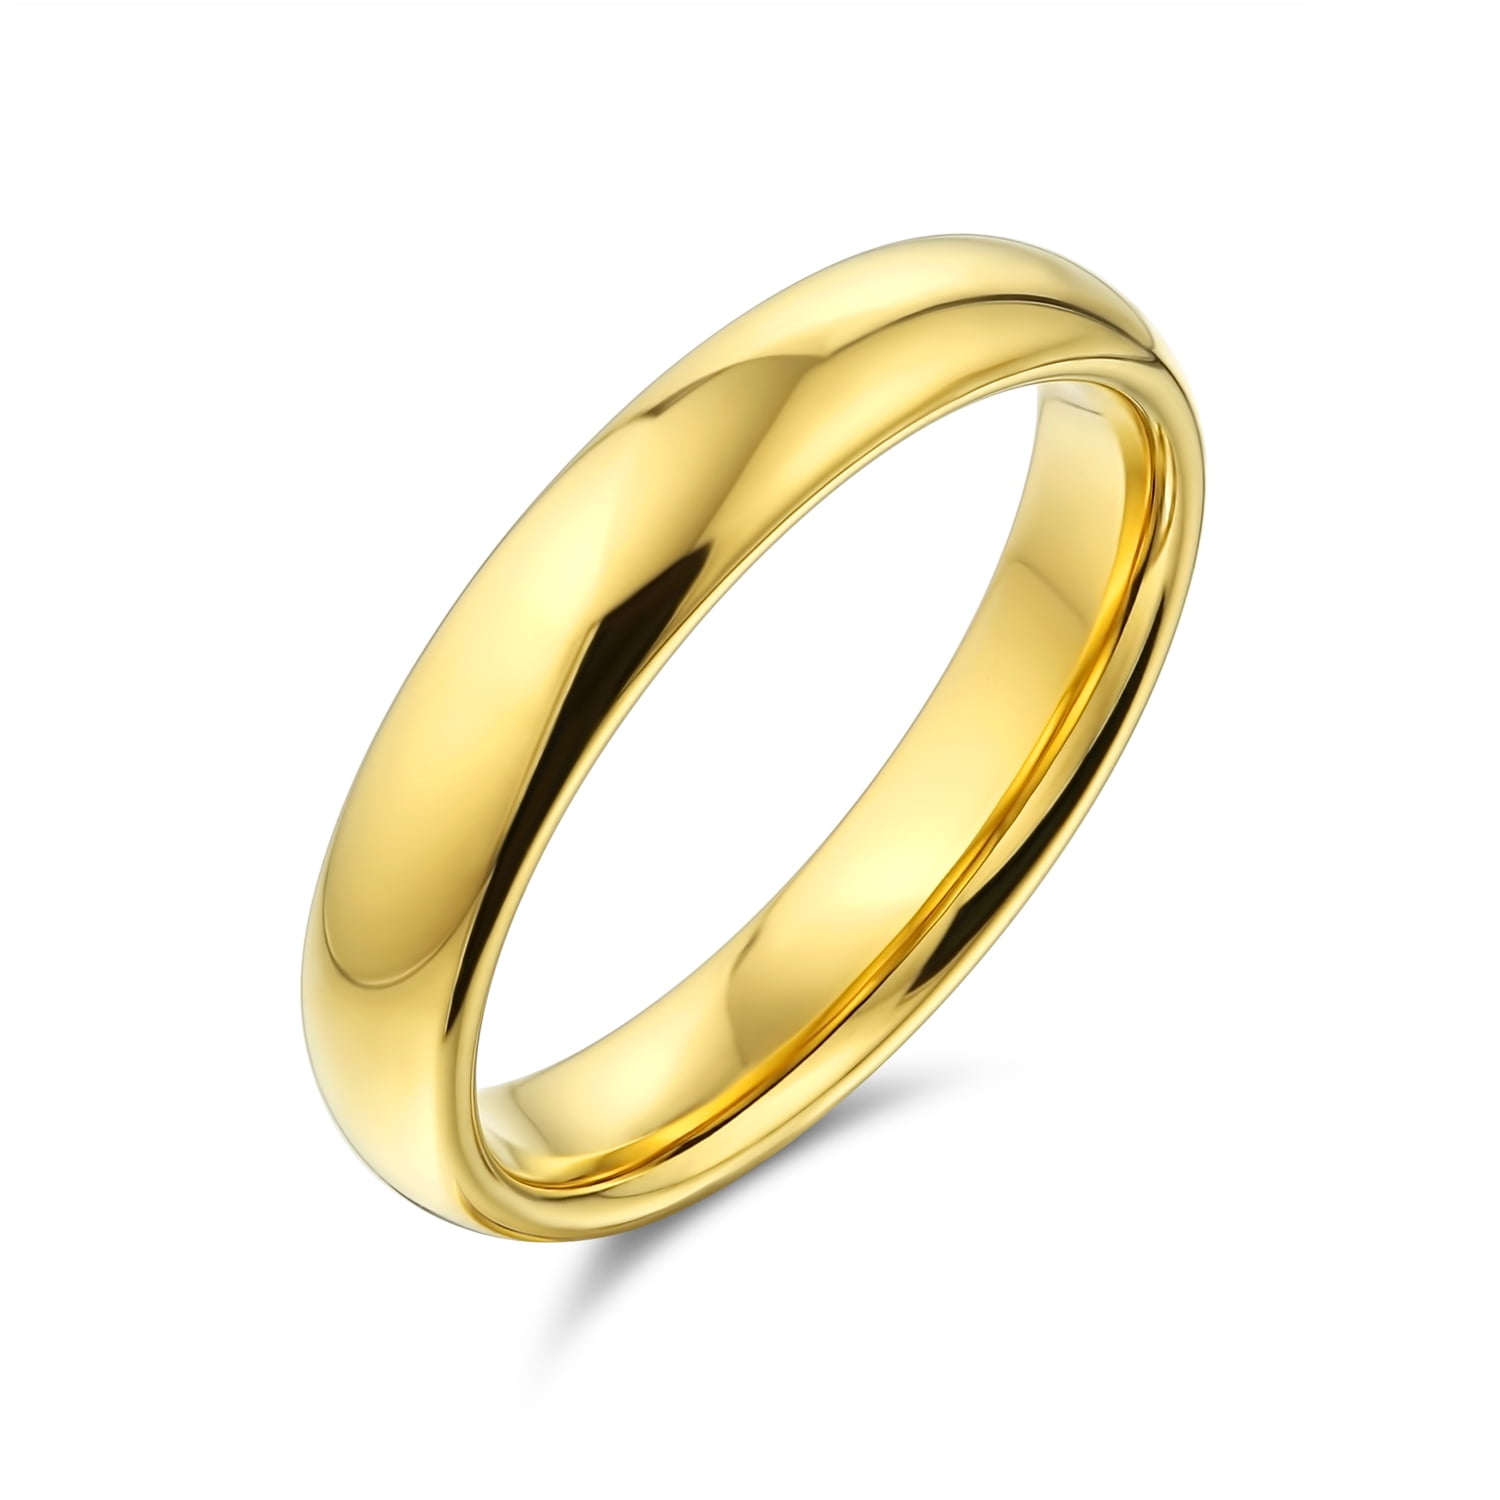 size 12 Gold Plated TITANIUM Plain Ring Band with Black Plated Edges 